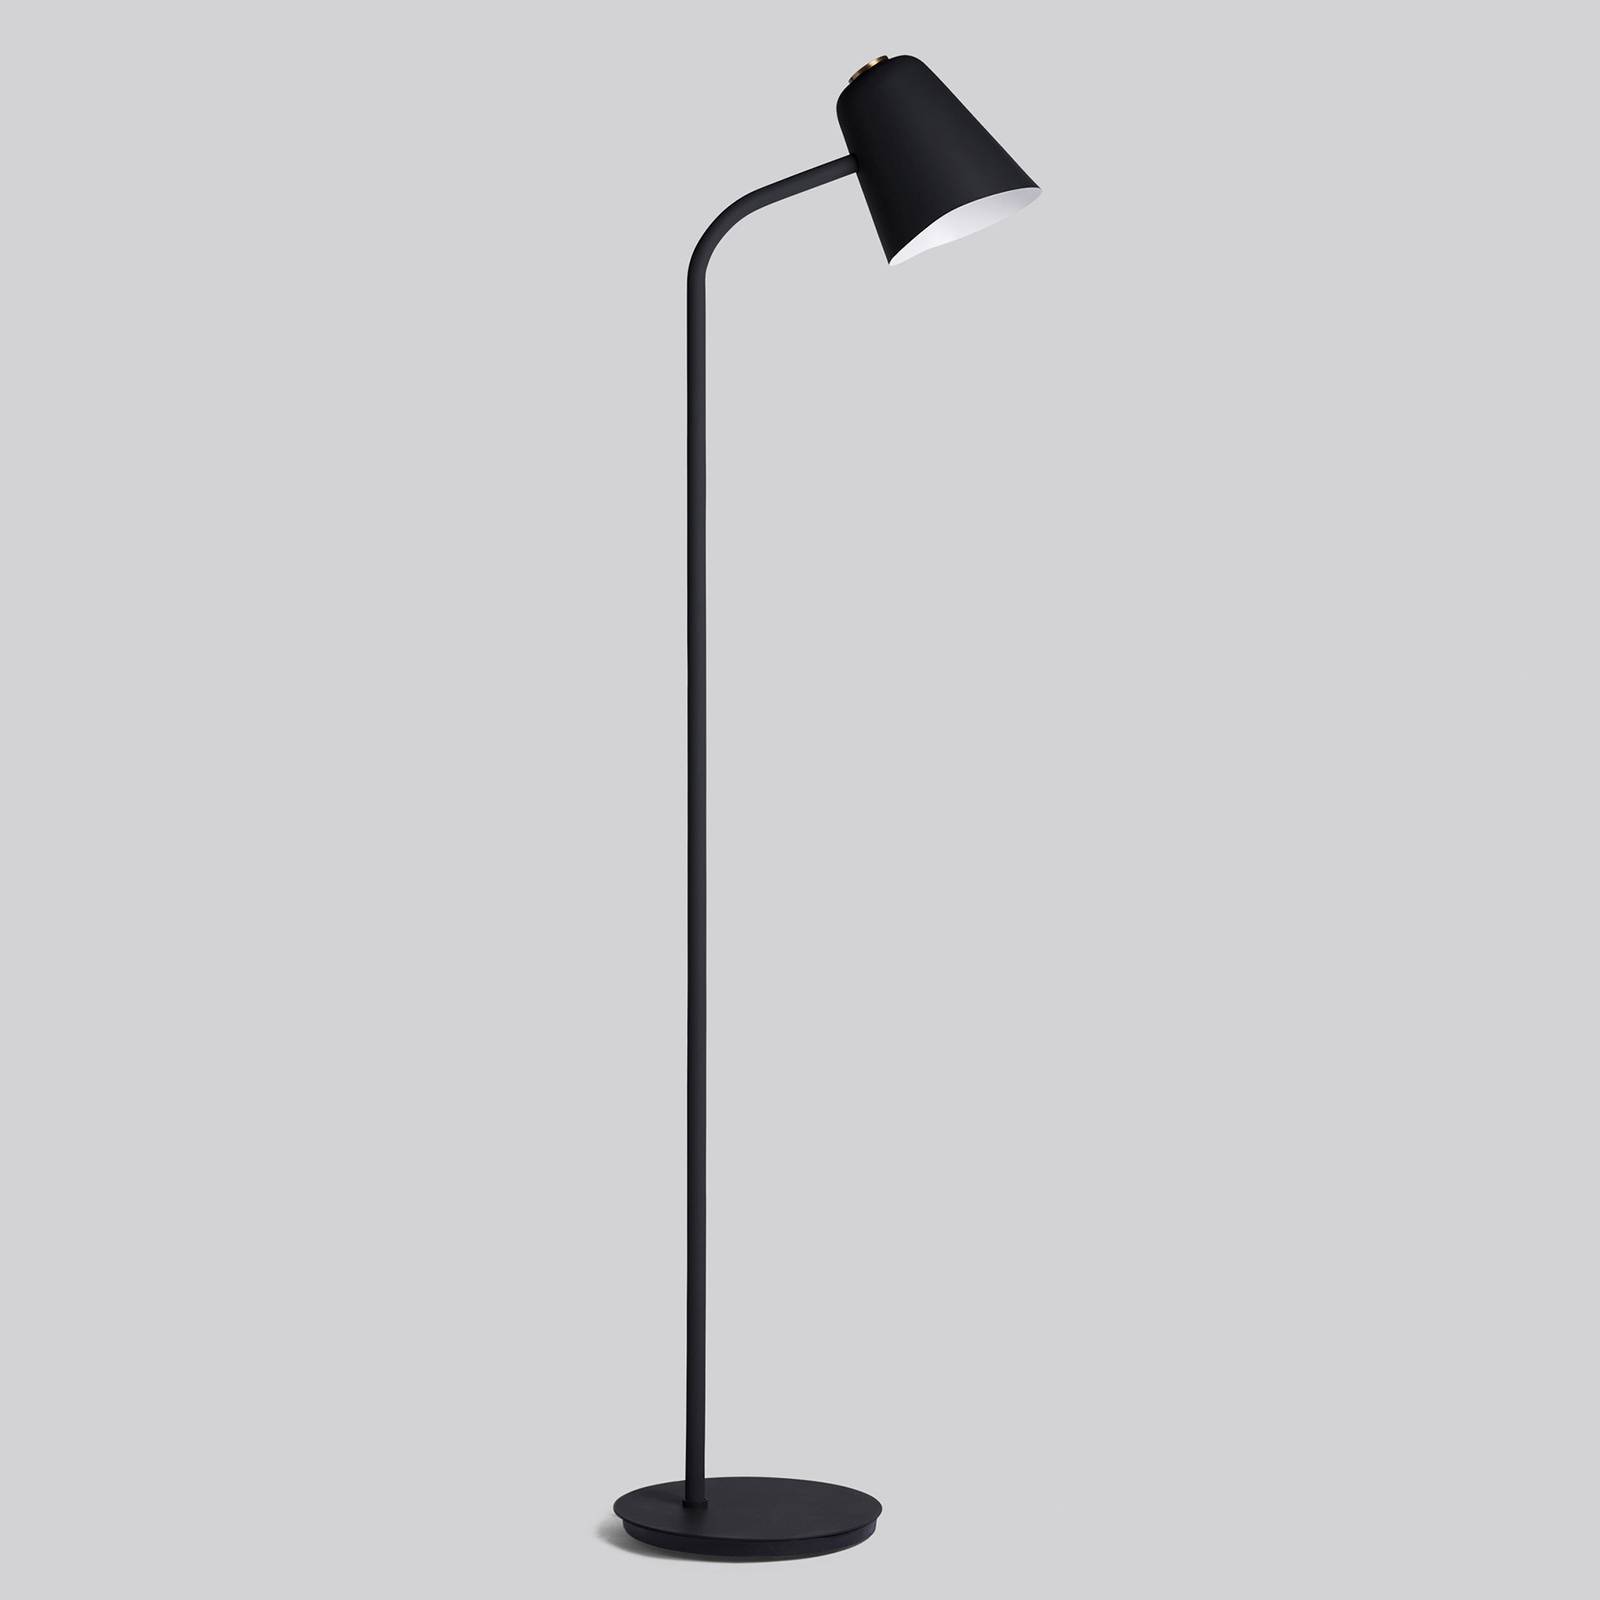 Image of Northern Me dim lampadaire LED dimmable noir 7090018216954